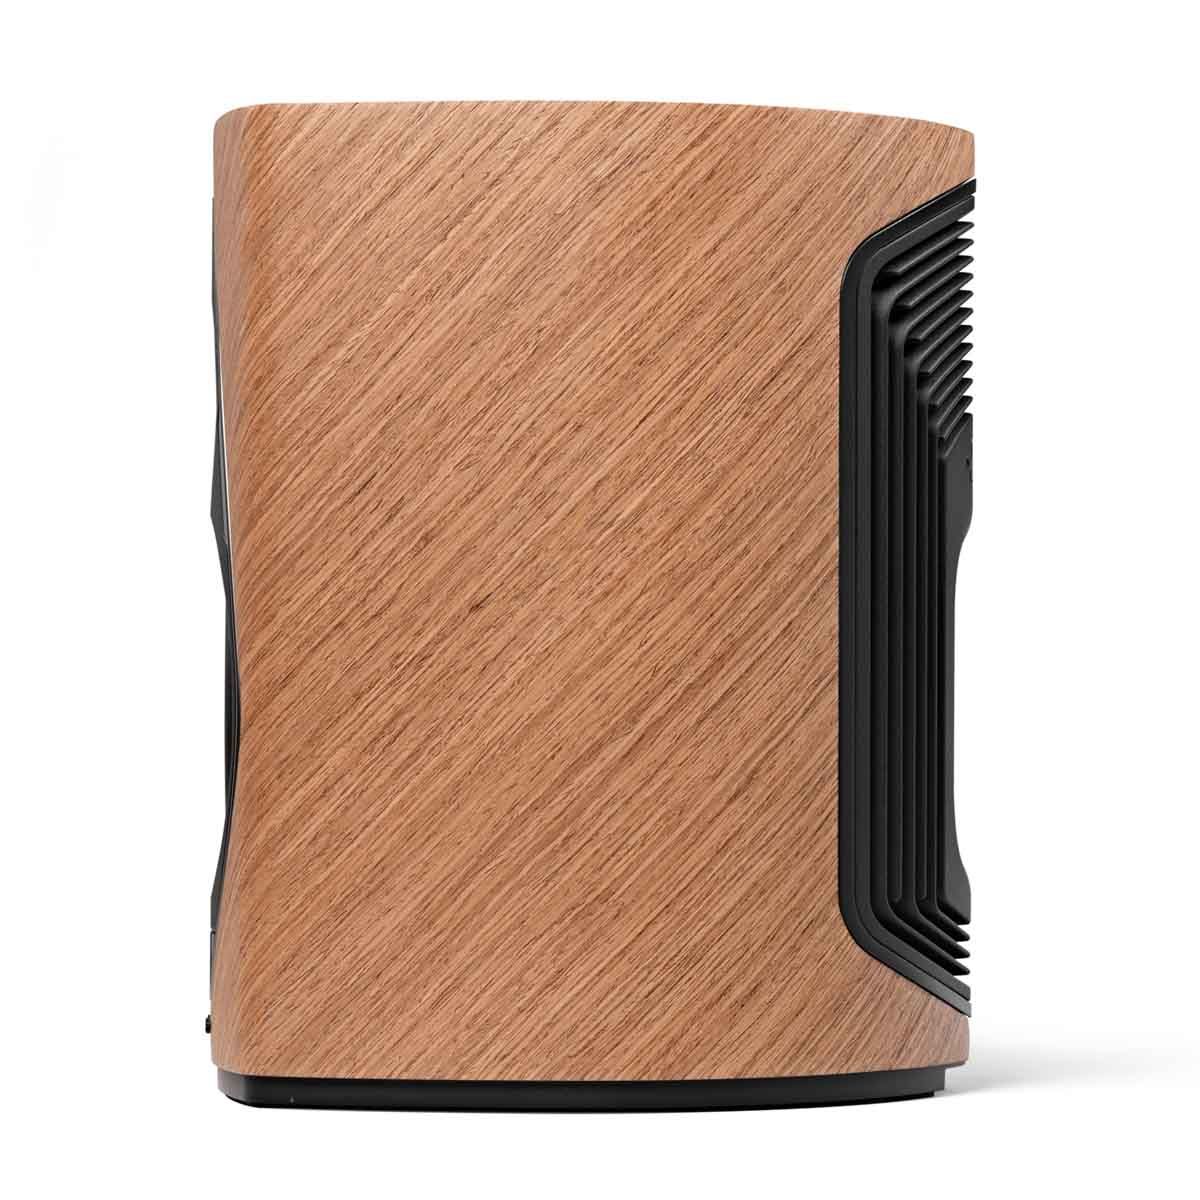 Sonus Faber Duetto Wireless Speaker System side view